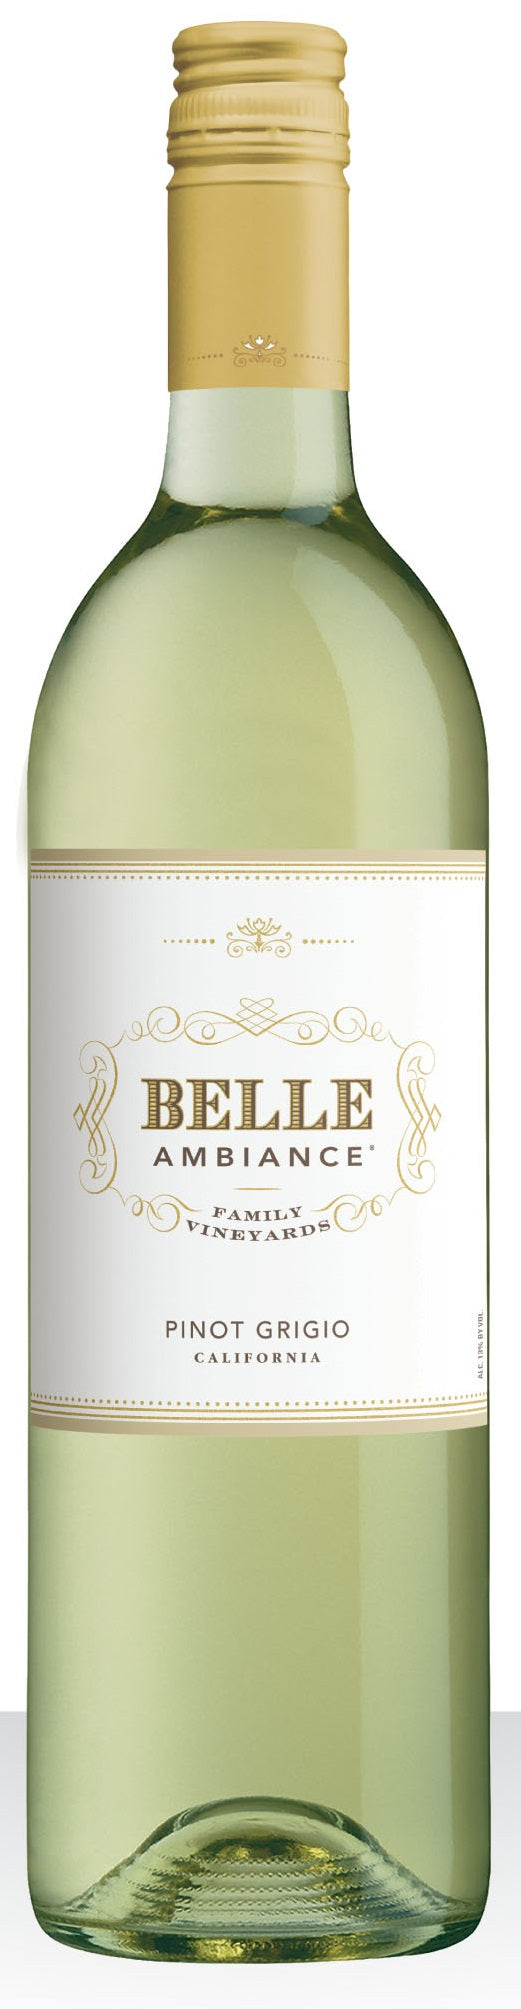 Belle Ambiance Pinot Grigio 2017